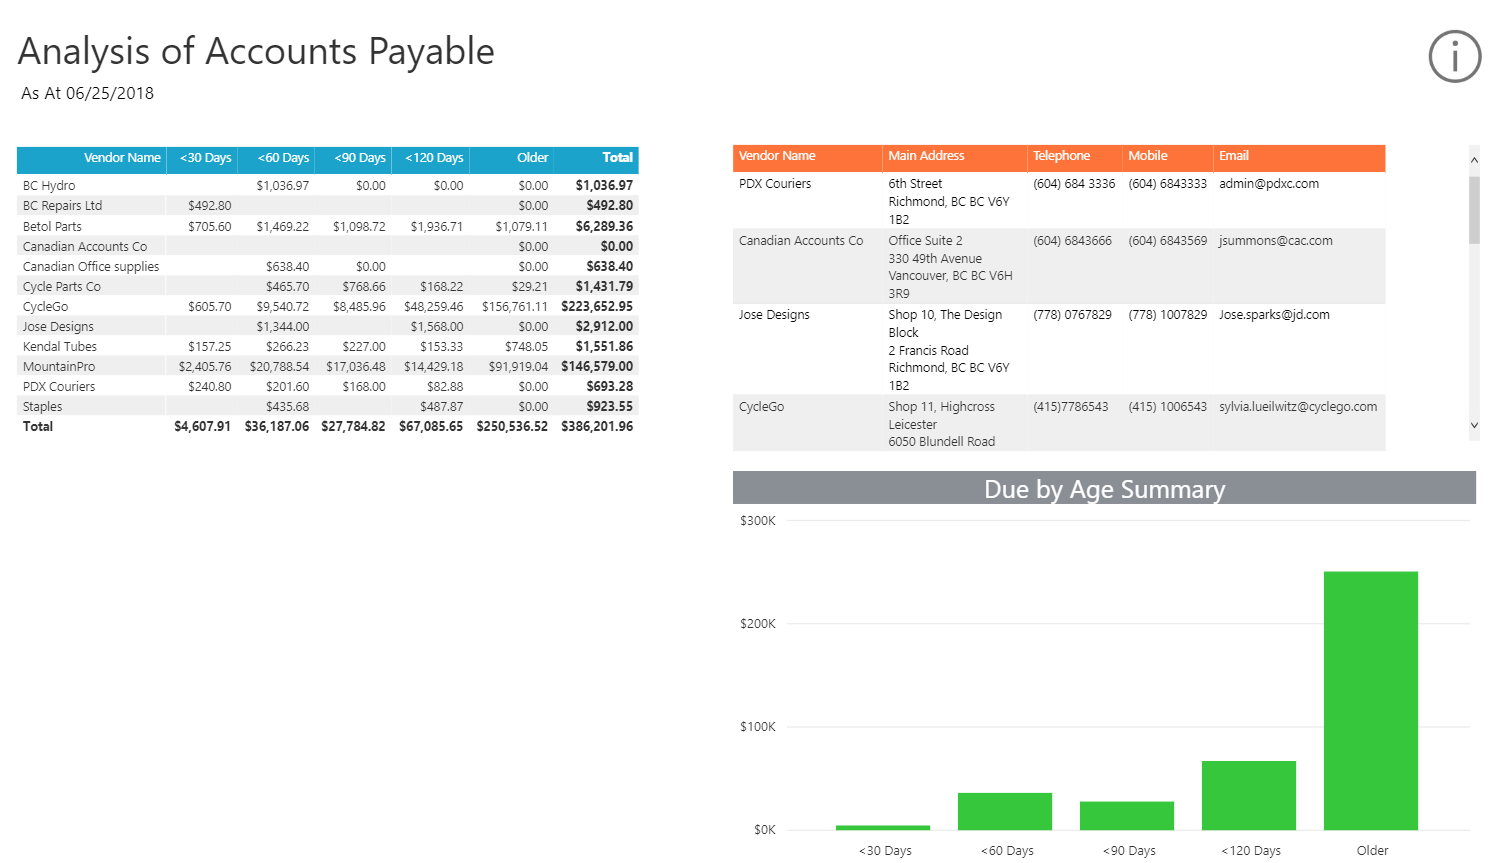 accounts payable dashboard and information for a fictional bicycle retailer